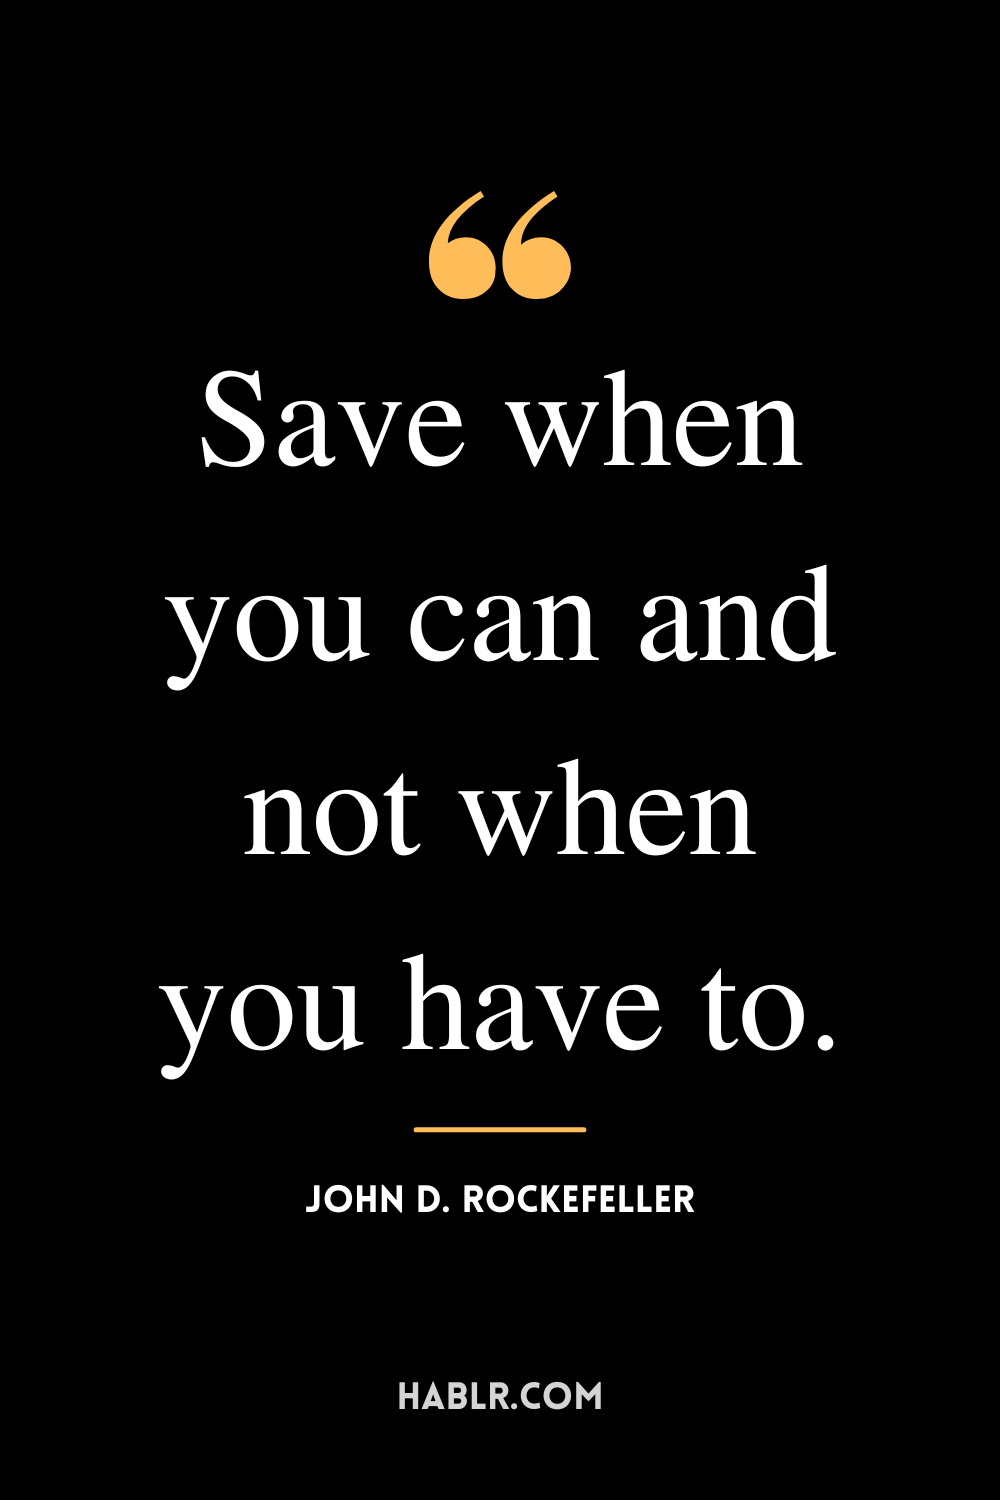 “Save when you can and not when you have to.” -John D. Rockefeller